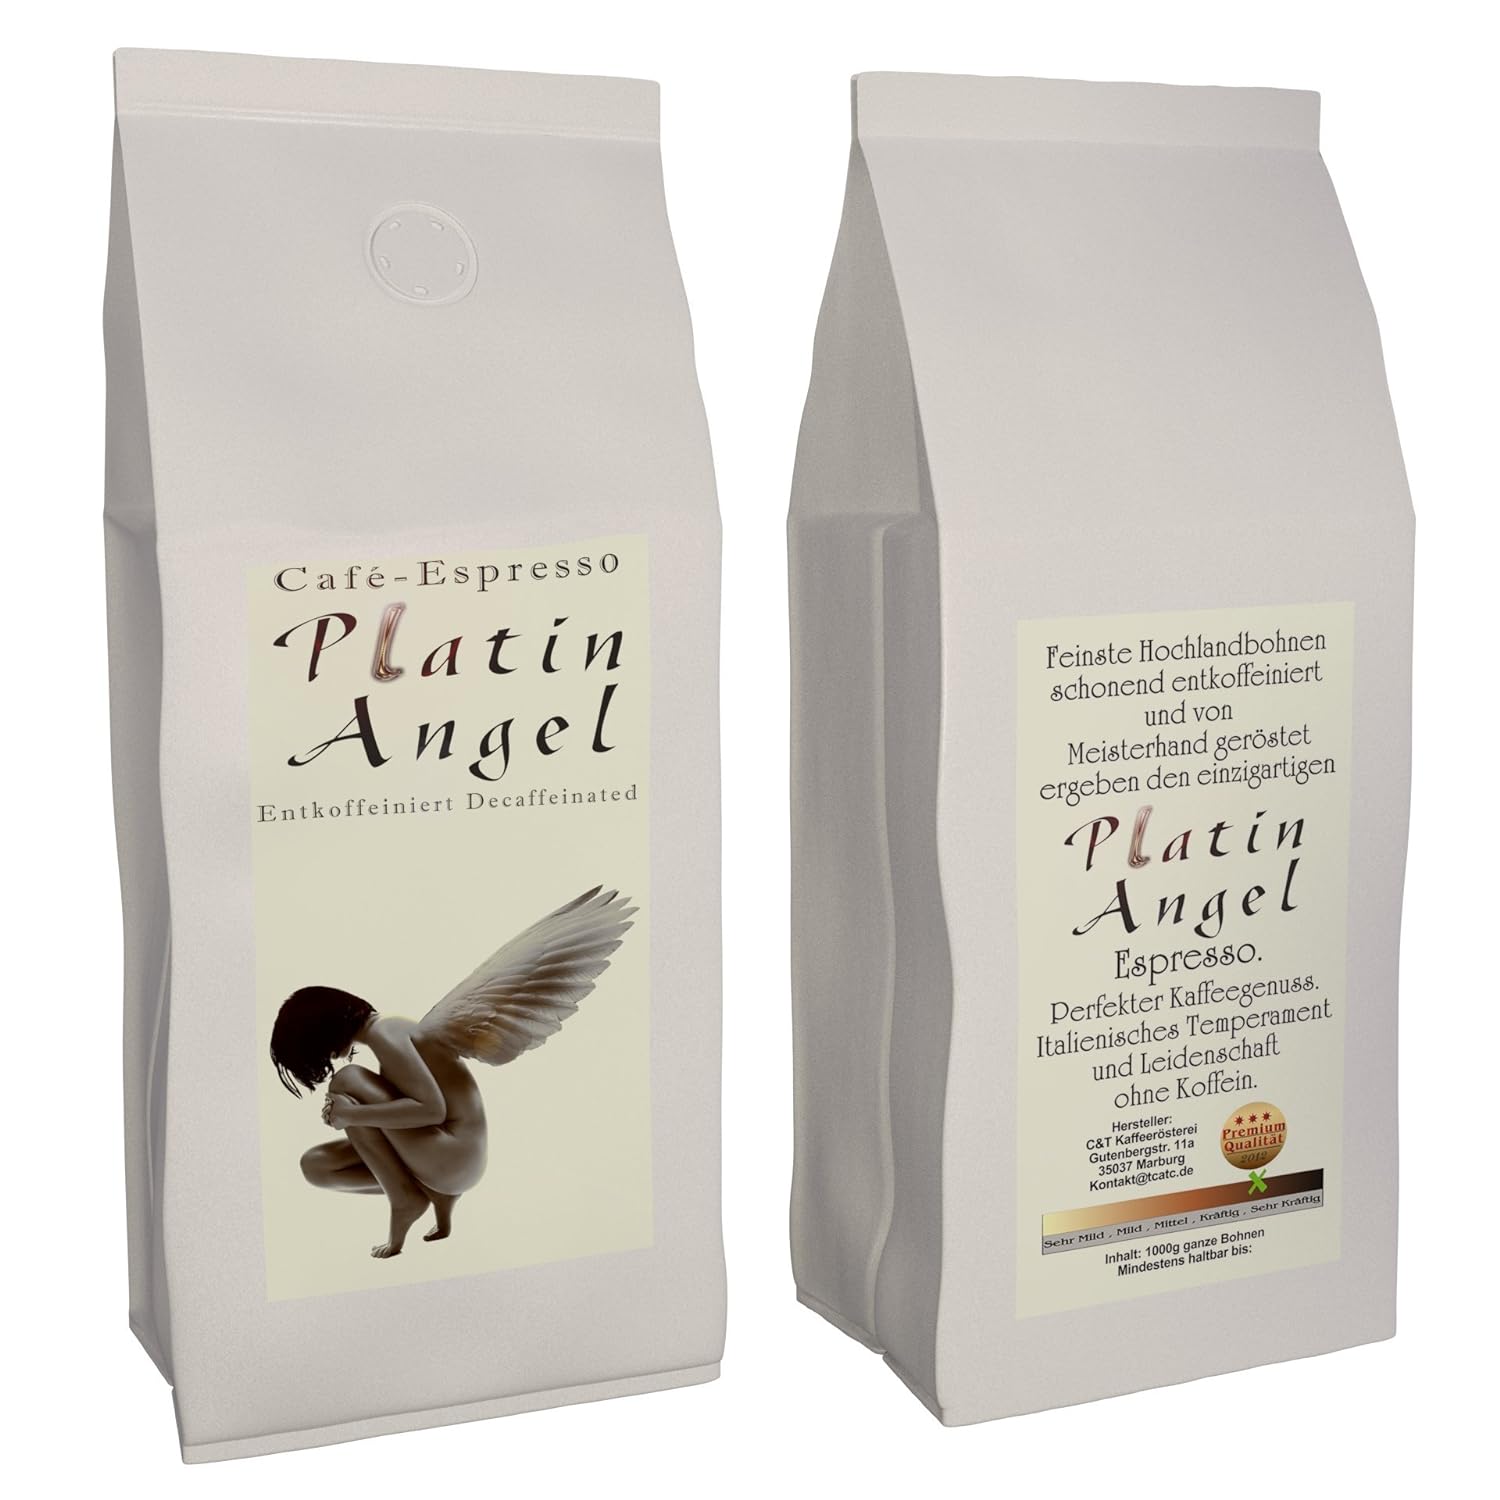 Espresso / Cafe - Coffee Beans Decaffeinated \"Platinum Angel\" Whole Beans 200 g - Low Acid - Gentle and Freshly Roasted